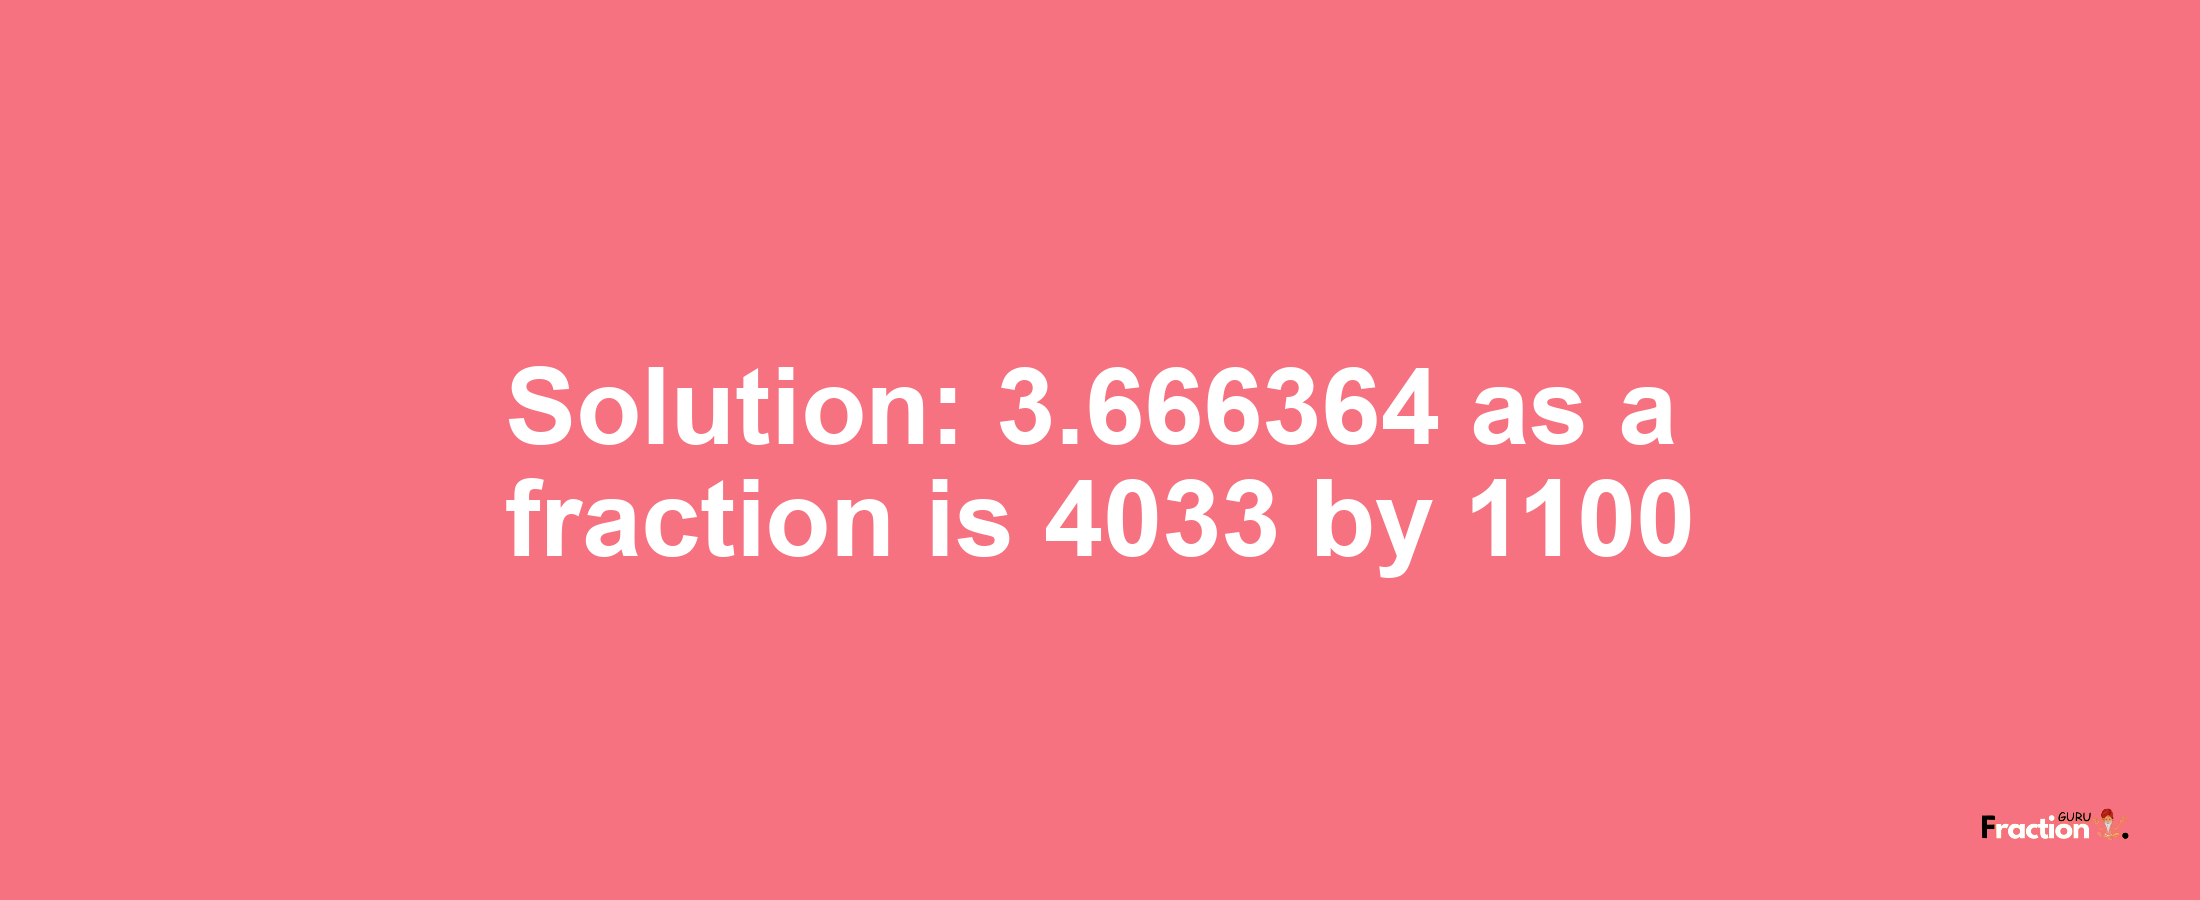 Solution:3.666364 as a fraction is 4033/1100